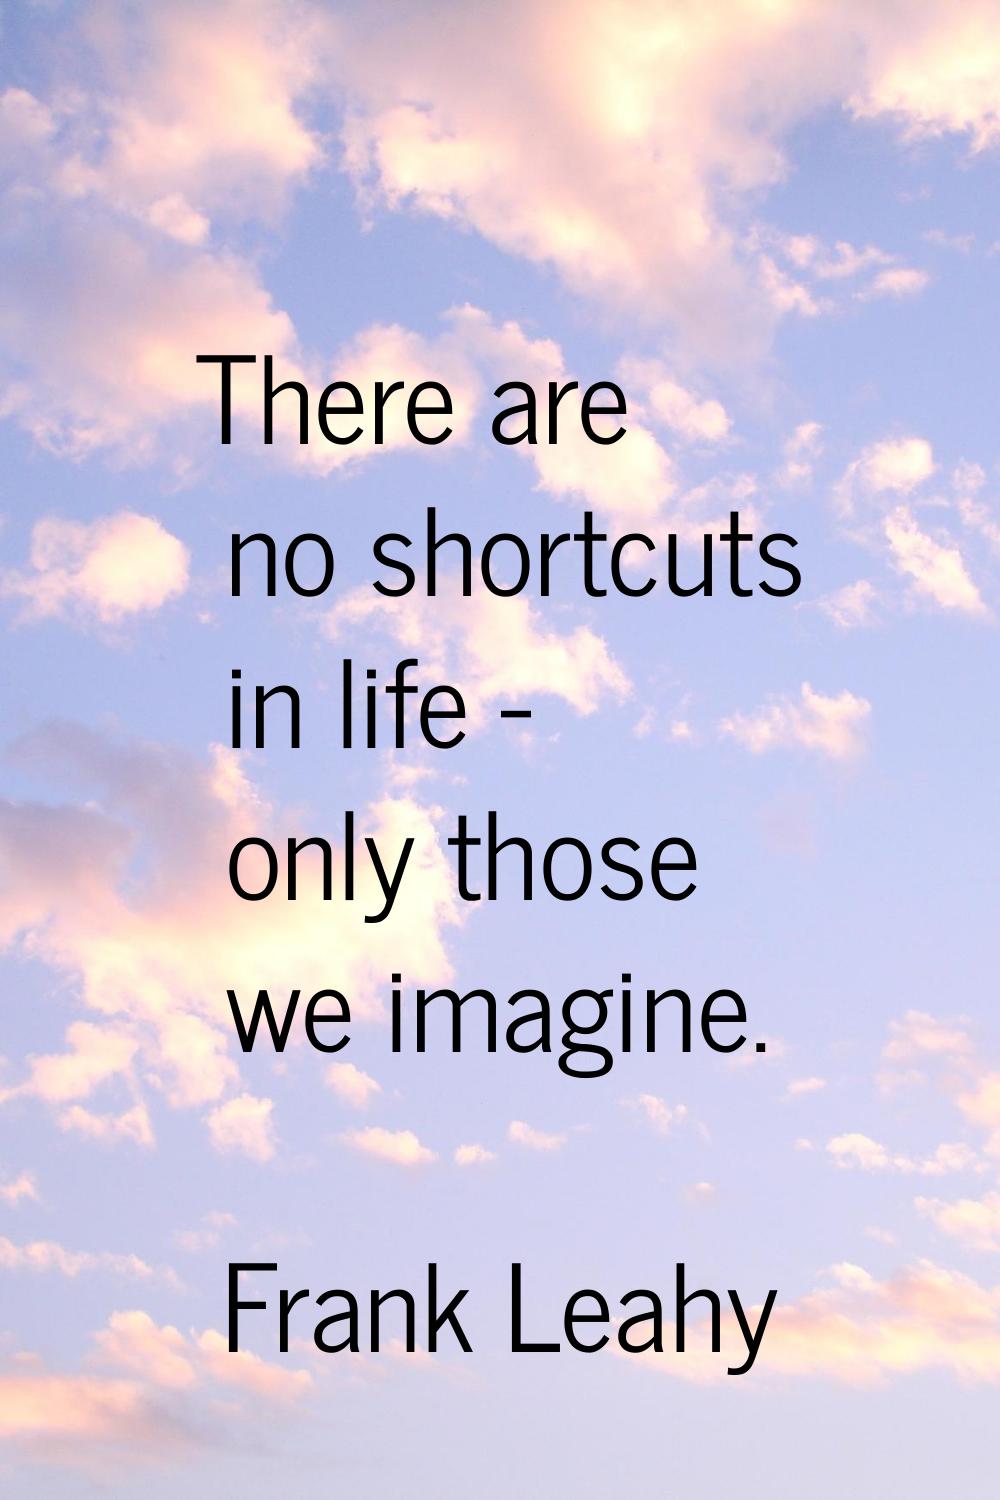 There are no shortcuts in life - only those we imagine.